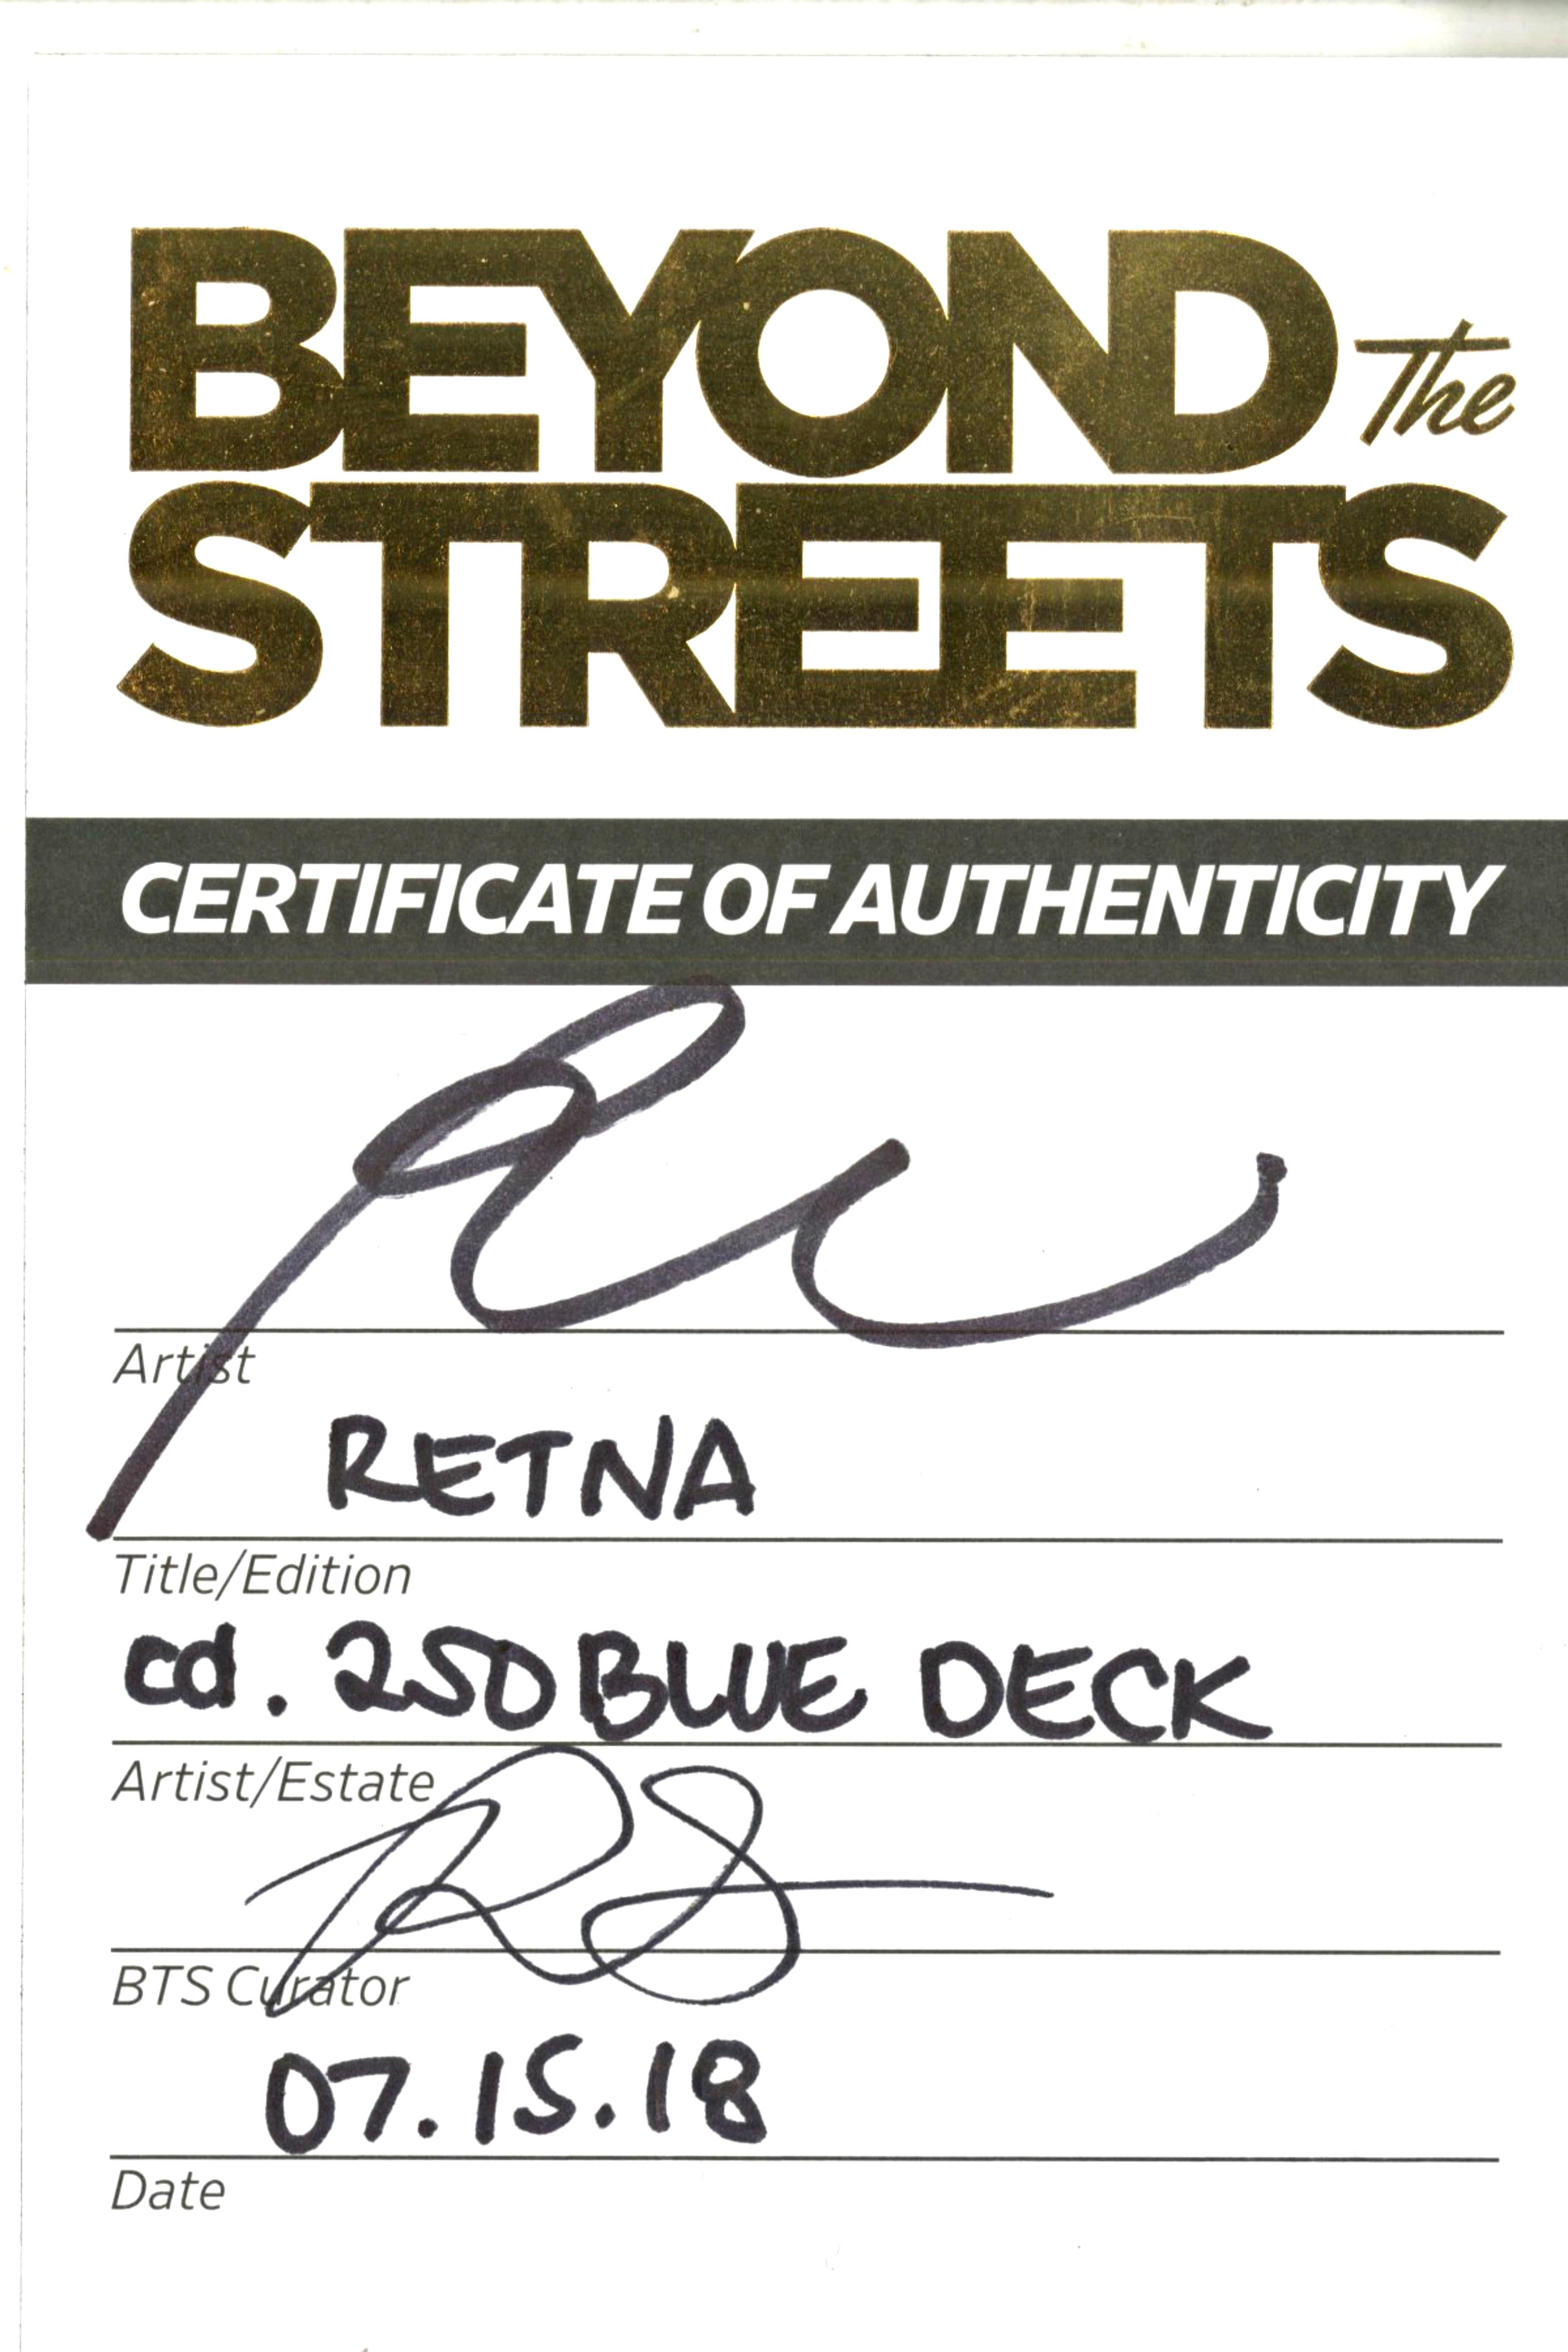 RETNA
Skateboard Skate deck (Blue with green back -and embossed COA hand signed by RETNA, 2018
Silkscreen on Maplewood skate deck. Accompanied by Hand signed Certificate of Authenticity on Embossed Letterhead.
32 × 8 1/2 inches
Edition of